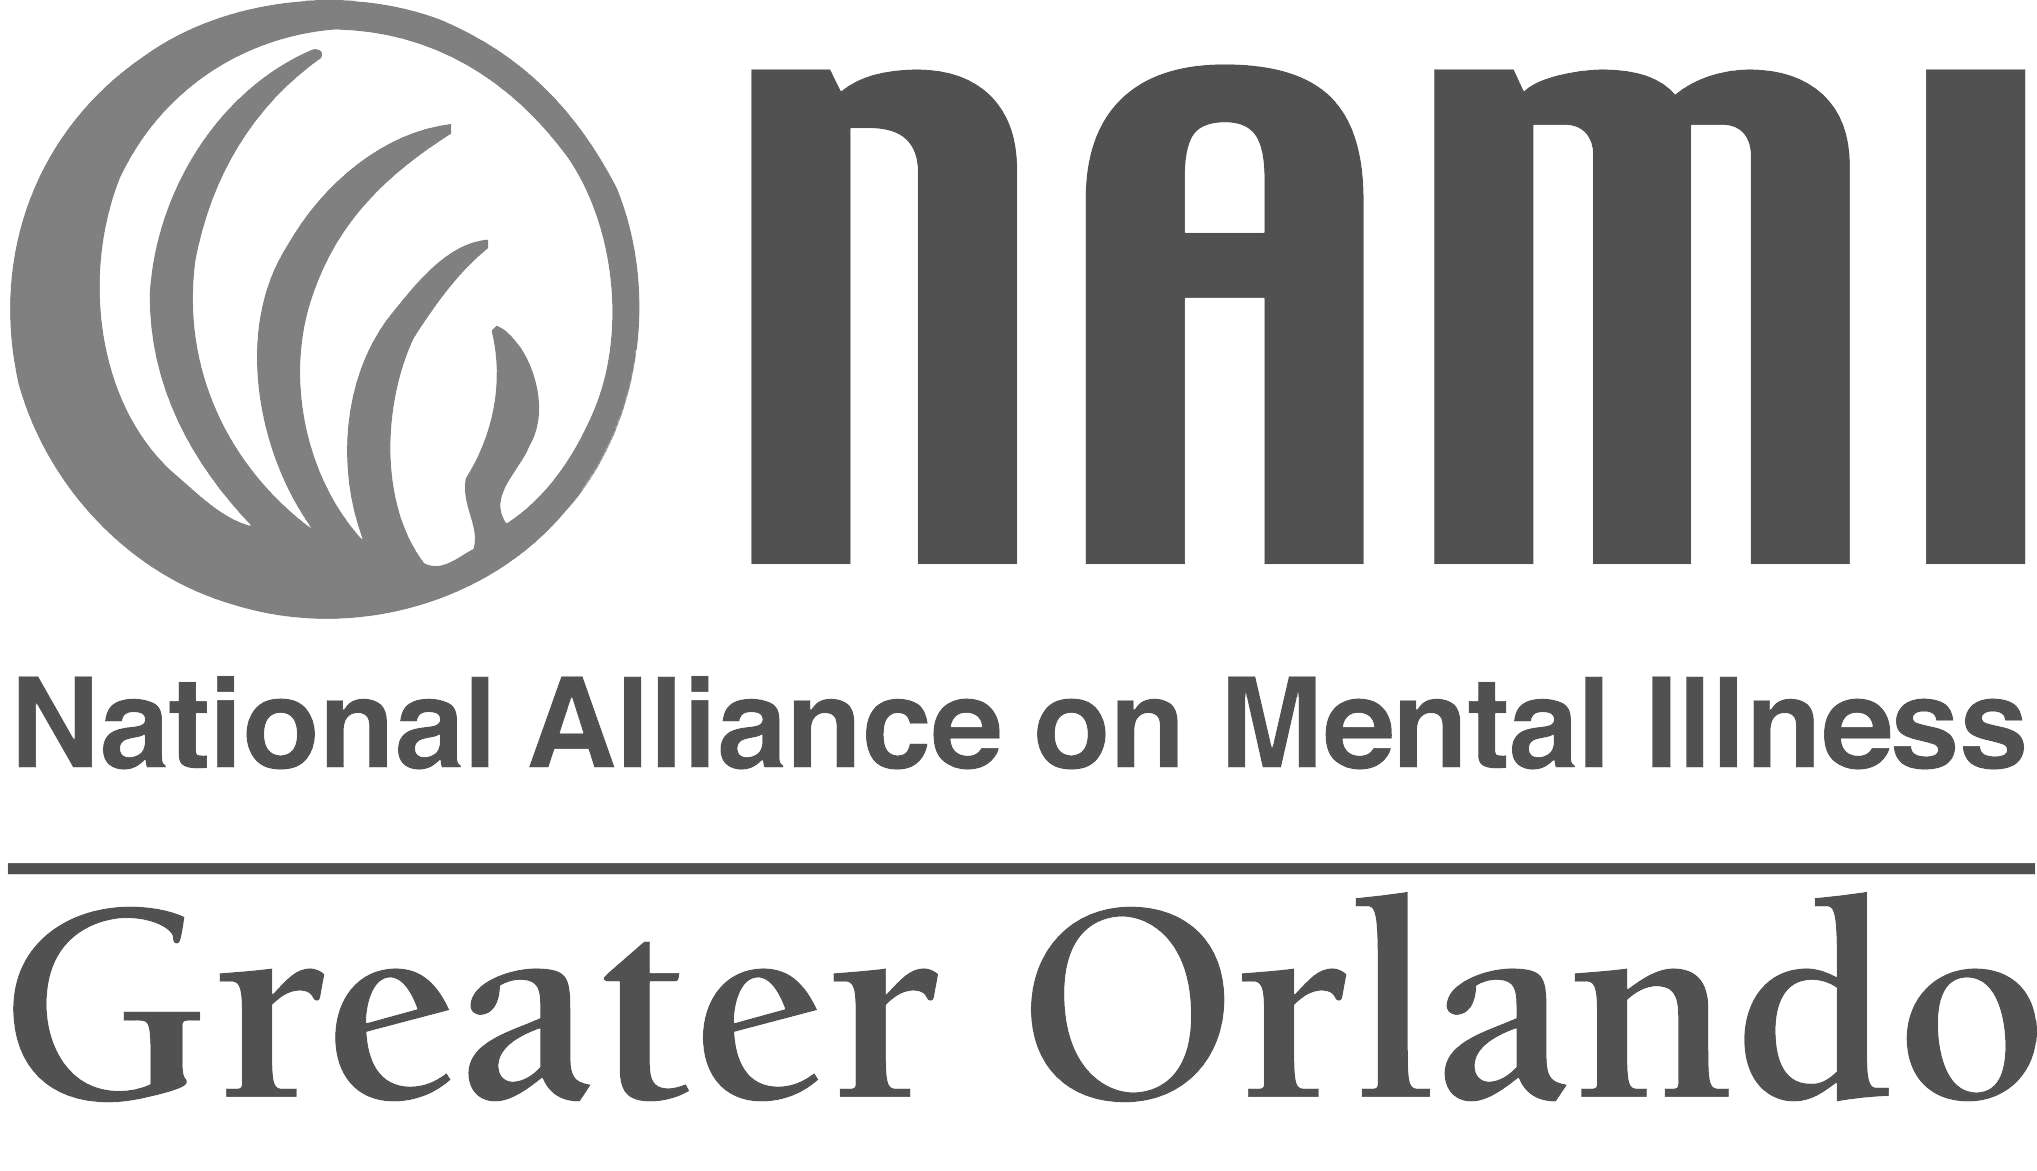 National Alliance on Mental Illness (NAMI) Magical Dining 2019 Charity logo